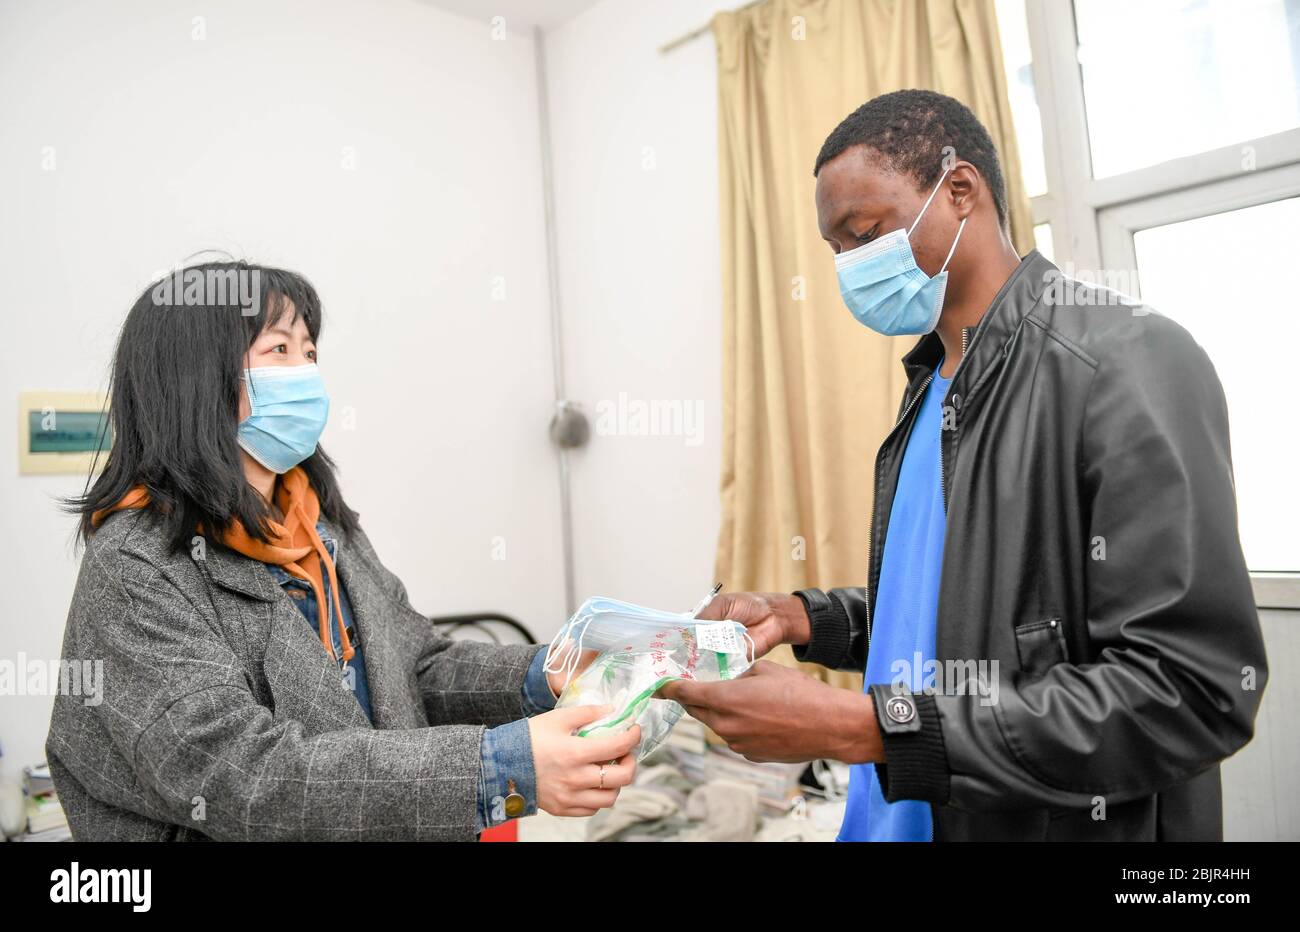 (200430) -- CHANGCHUN, April 30, 2020 (Xinhua) -- Mustapha (R) receives masks and herbal tea from the school in Changchun University of Chinese Medicine in Changchun, northeast China's Jilin Province, April 30, 2020. Mustapha Abdul Raheem has experienced two epidemics in the past six years: one was the Ebola in West Africa in 2014, during which he witnessed sufferings and aspired to study medicine; the other was the COVID-19. This time as a medical student in China, he was better prepared, both professionally and mentally. TO GO WITH 'Feature: An African medical student's fight against COVID-1 Stock Photo